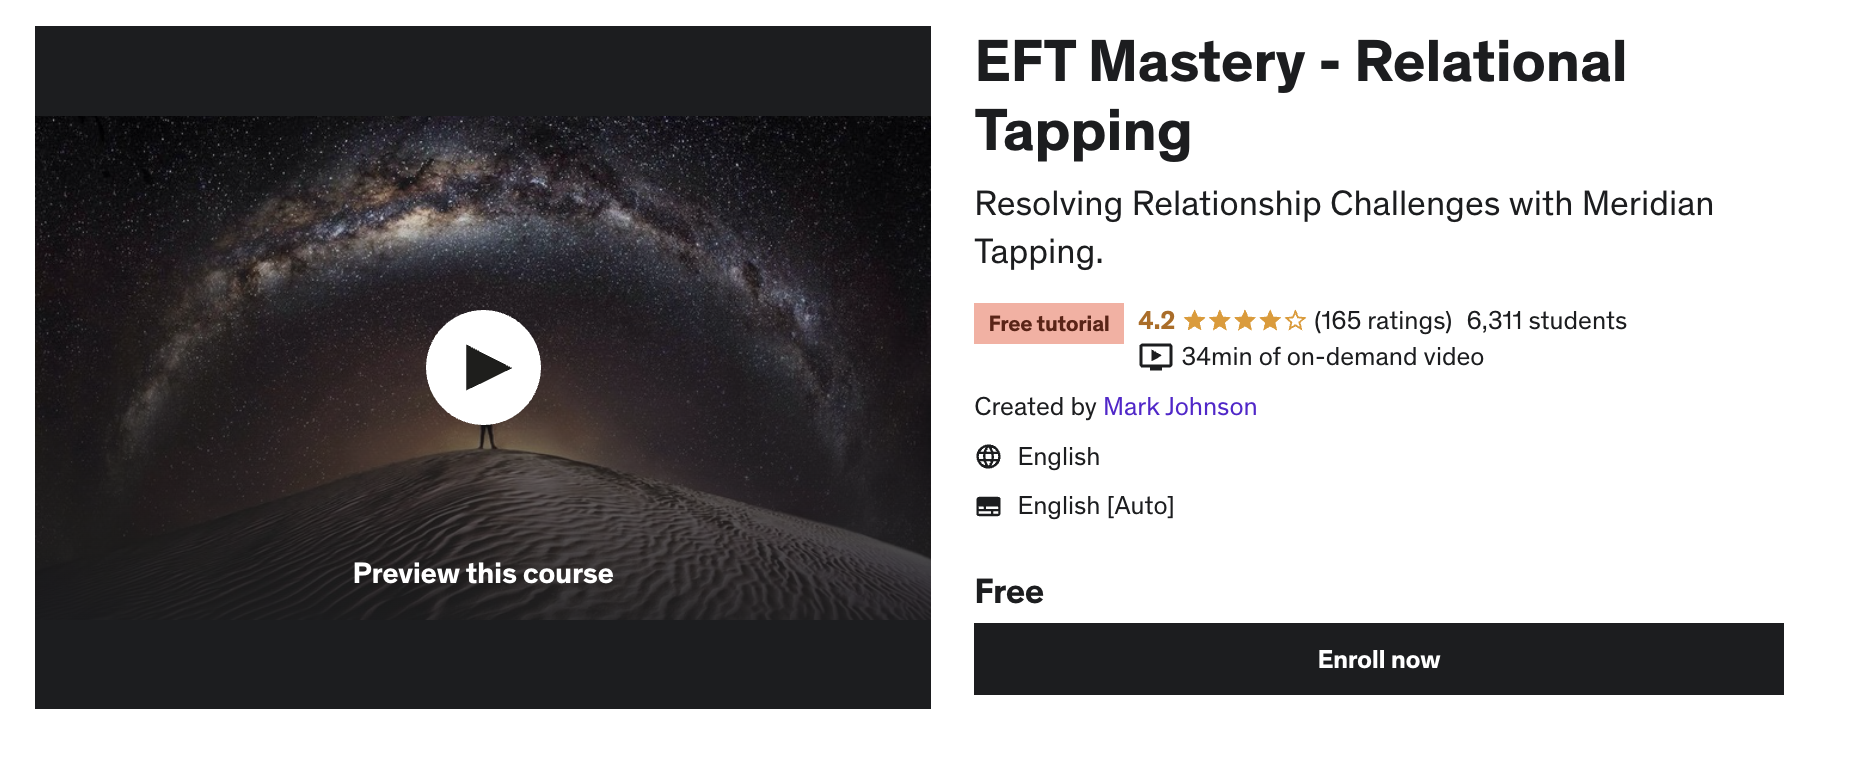 EFT Mastery - Relational Tapping